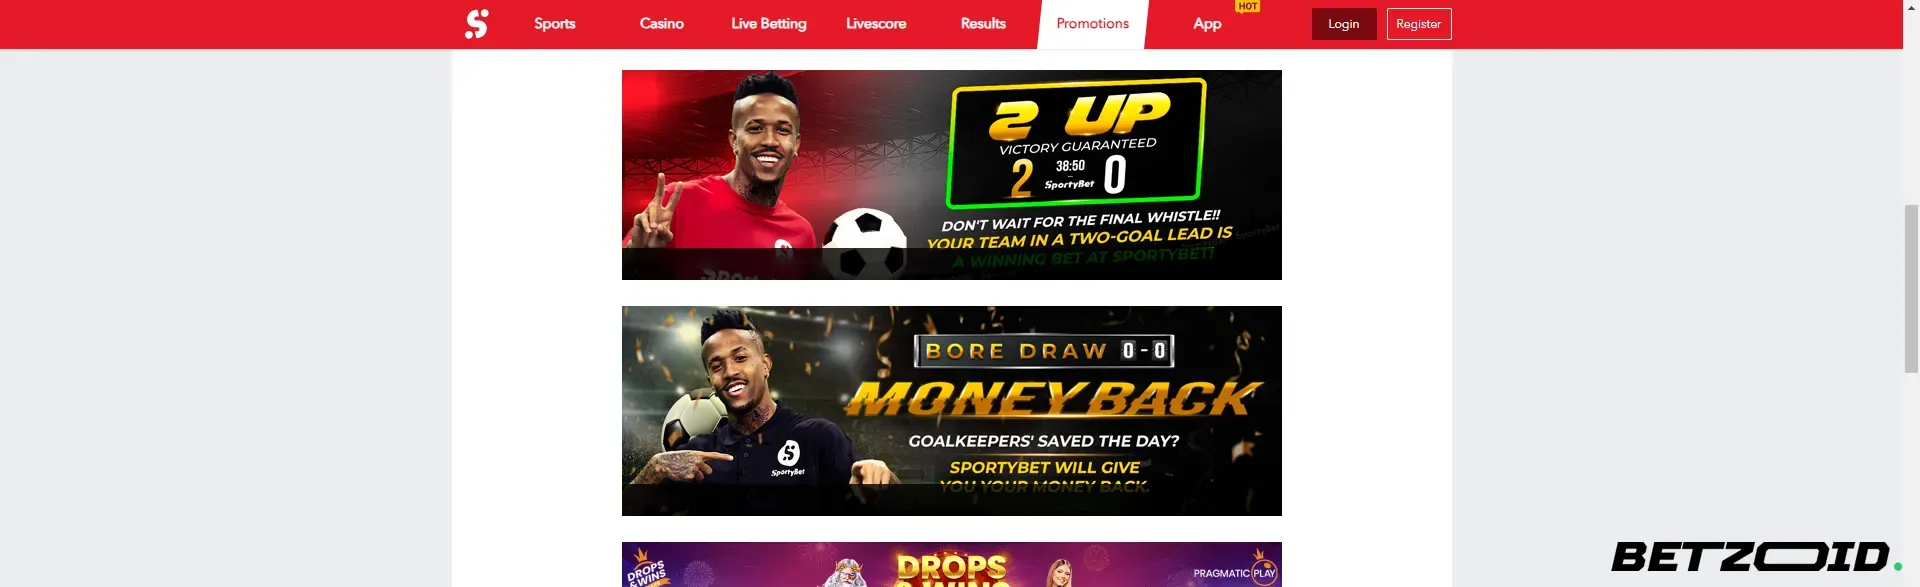 Sportybet promotions page.